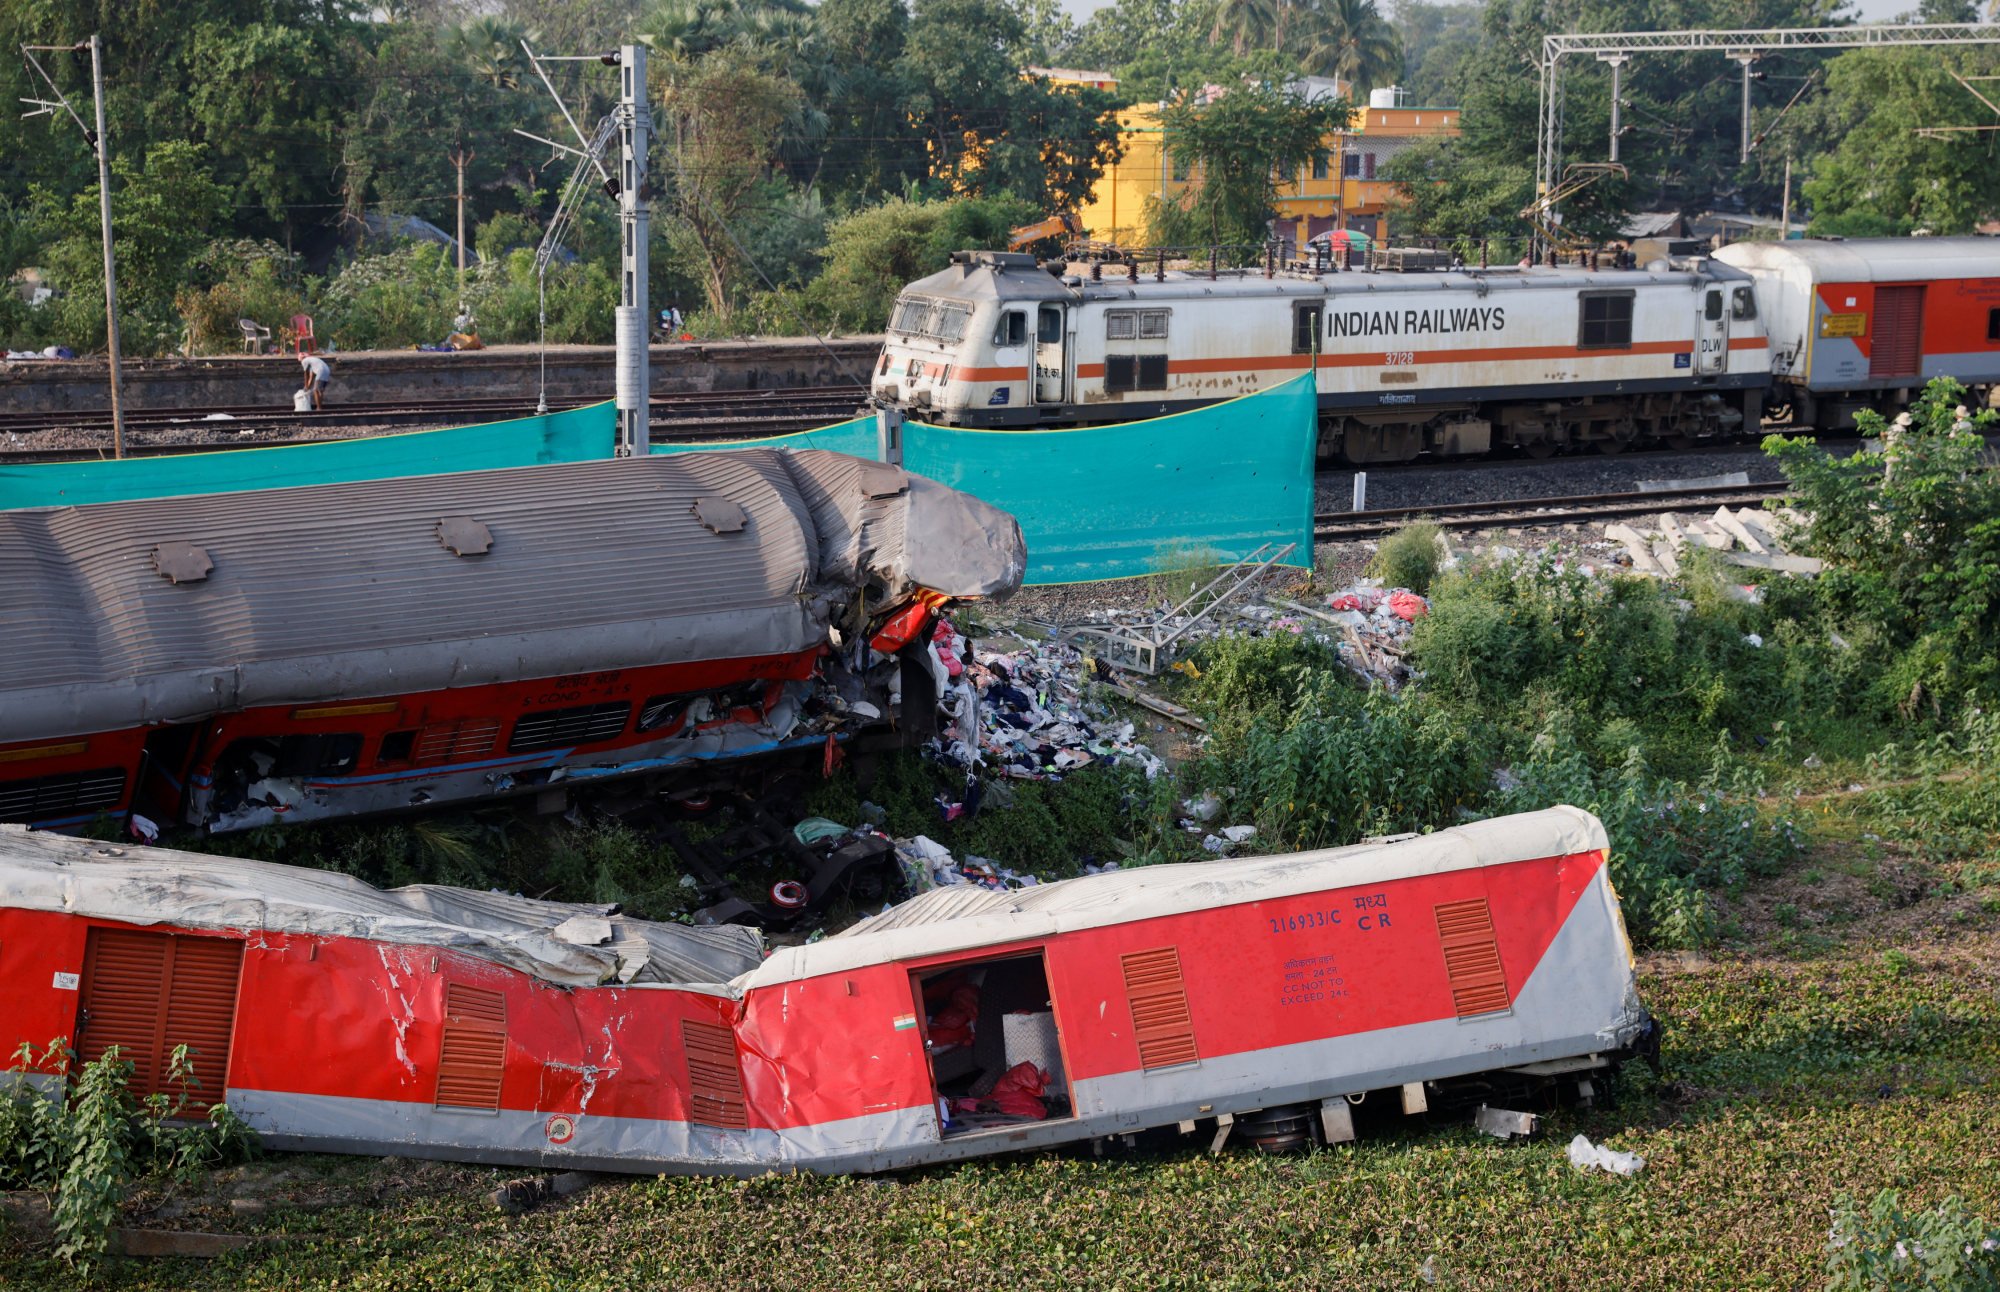 India's train crash shows chronic lack of investment in improving safety,  experts say